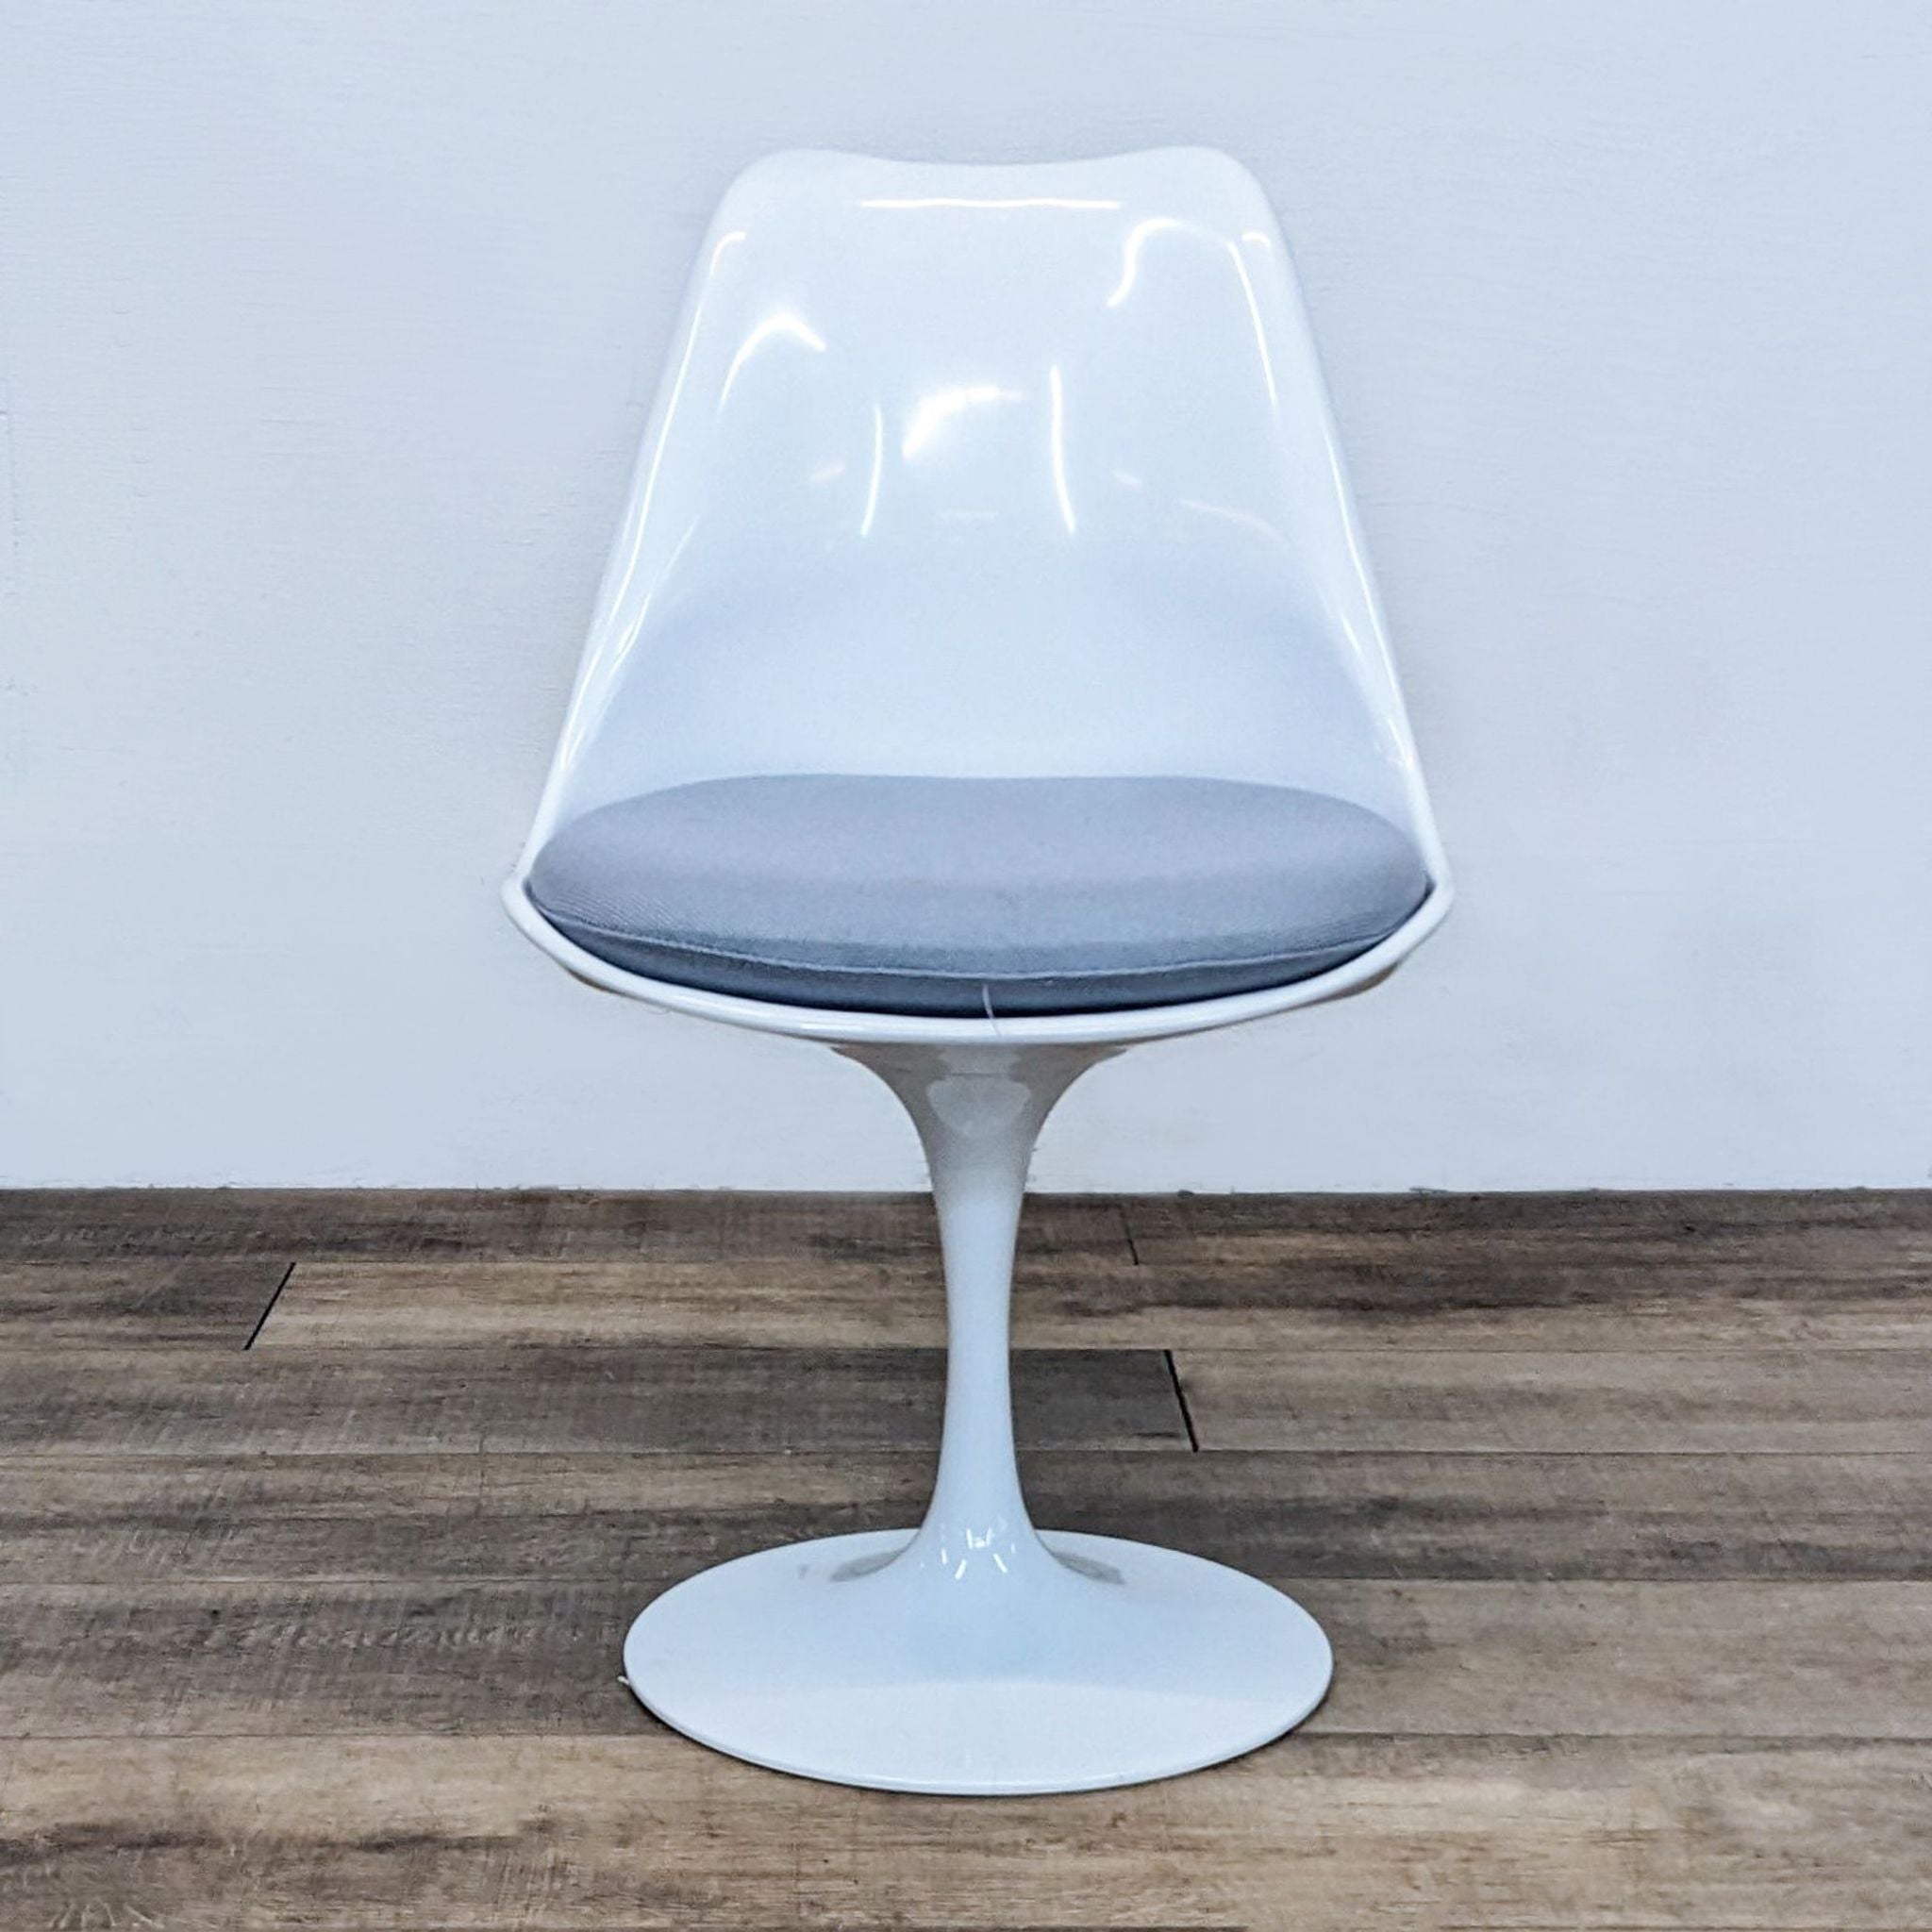 Modway Lippa dining chair with swivel tulip base and ergonomic white seat with gray cushion.